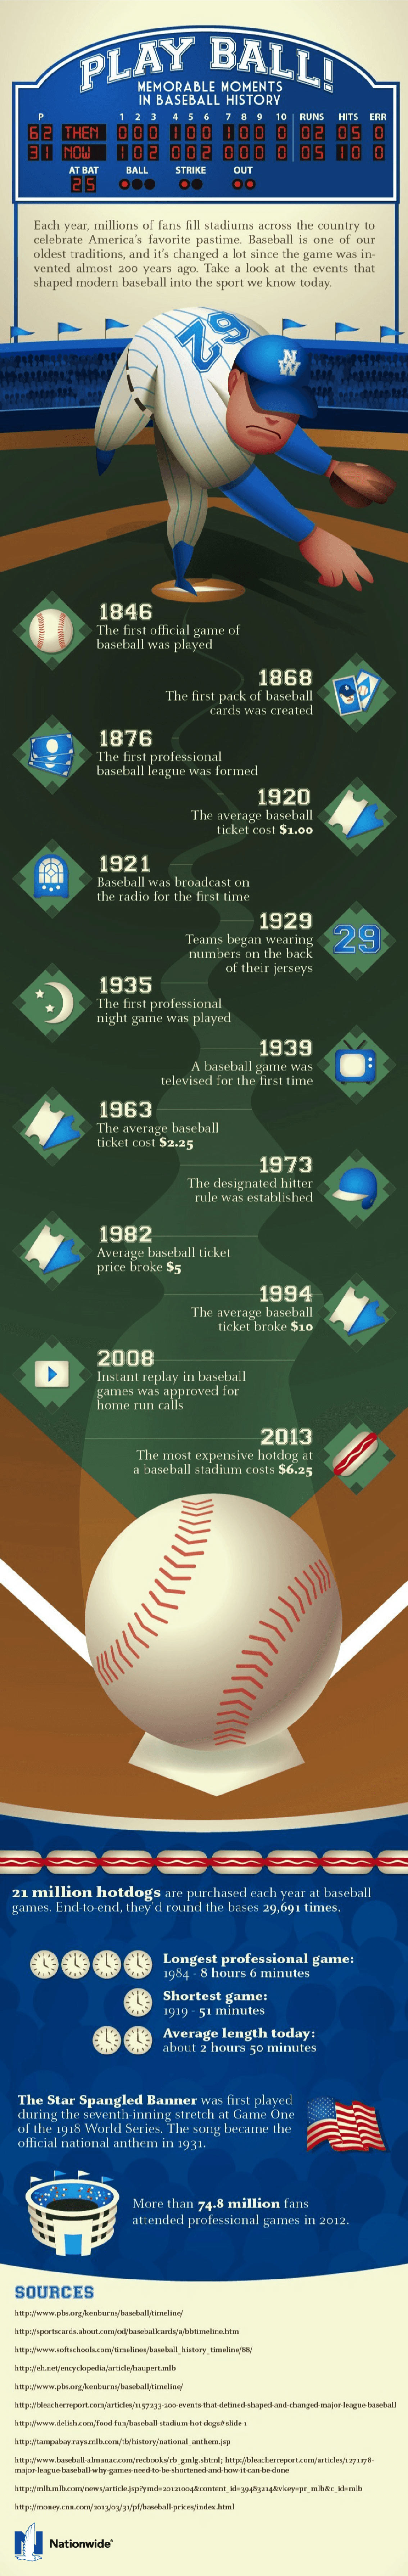 Memorable Moments in Baseball History - Sports Infographic